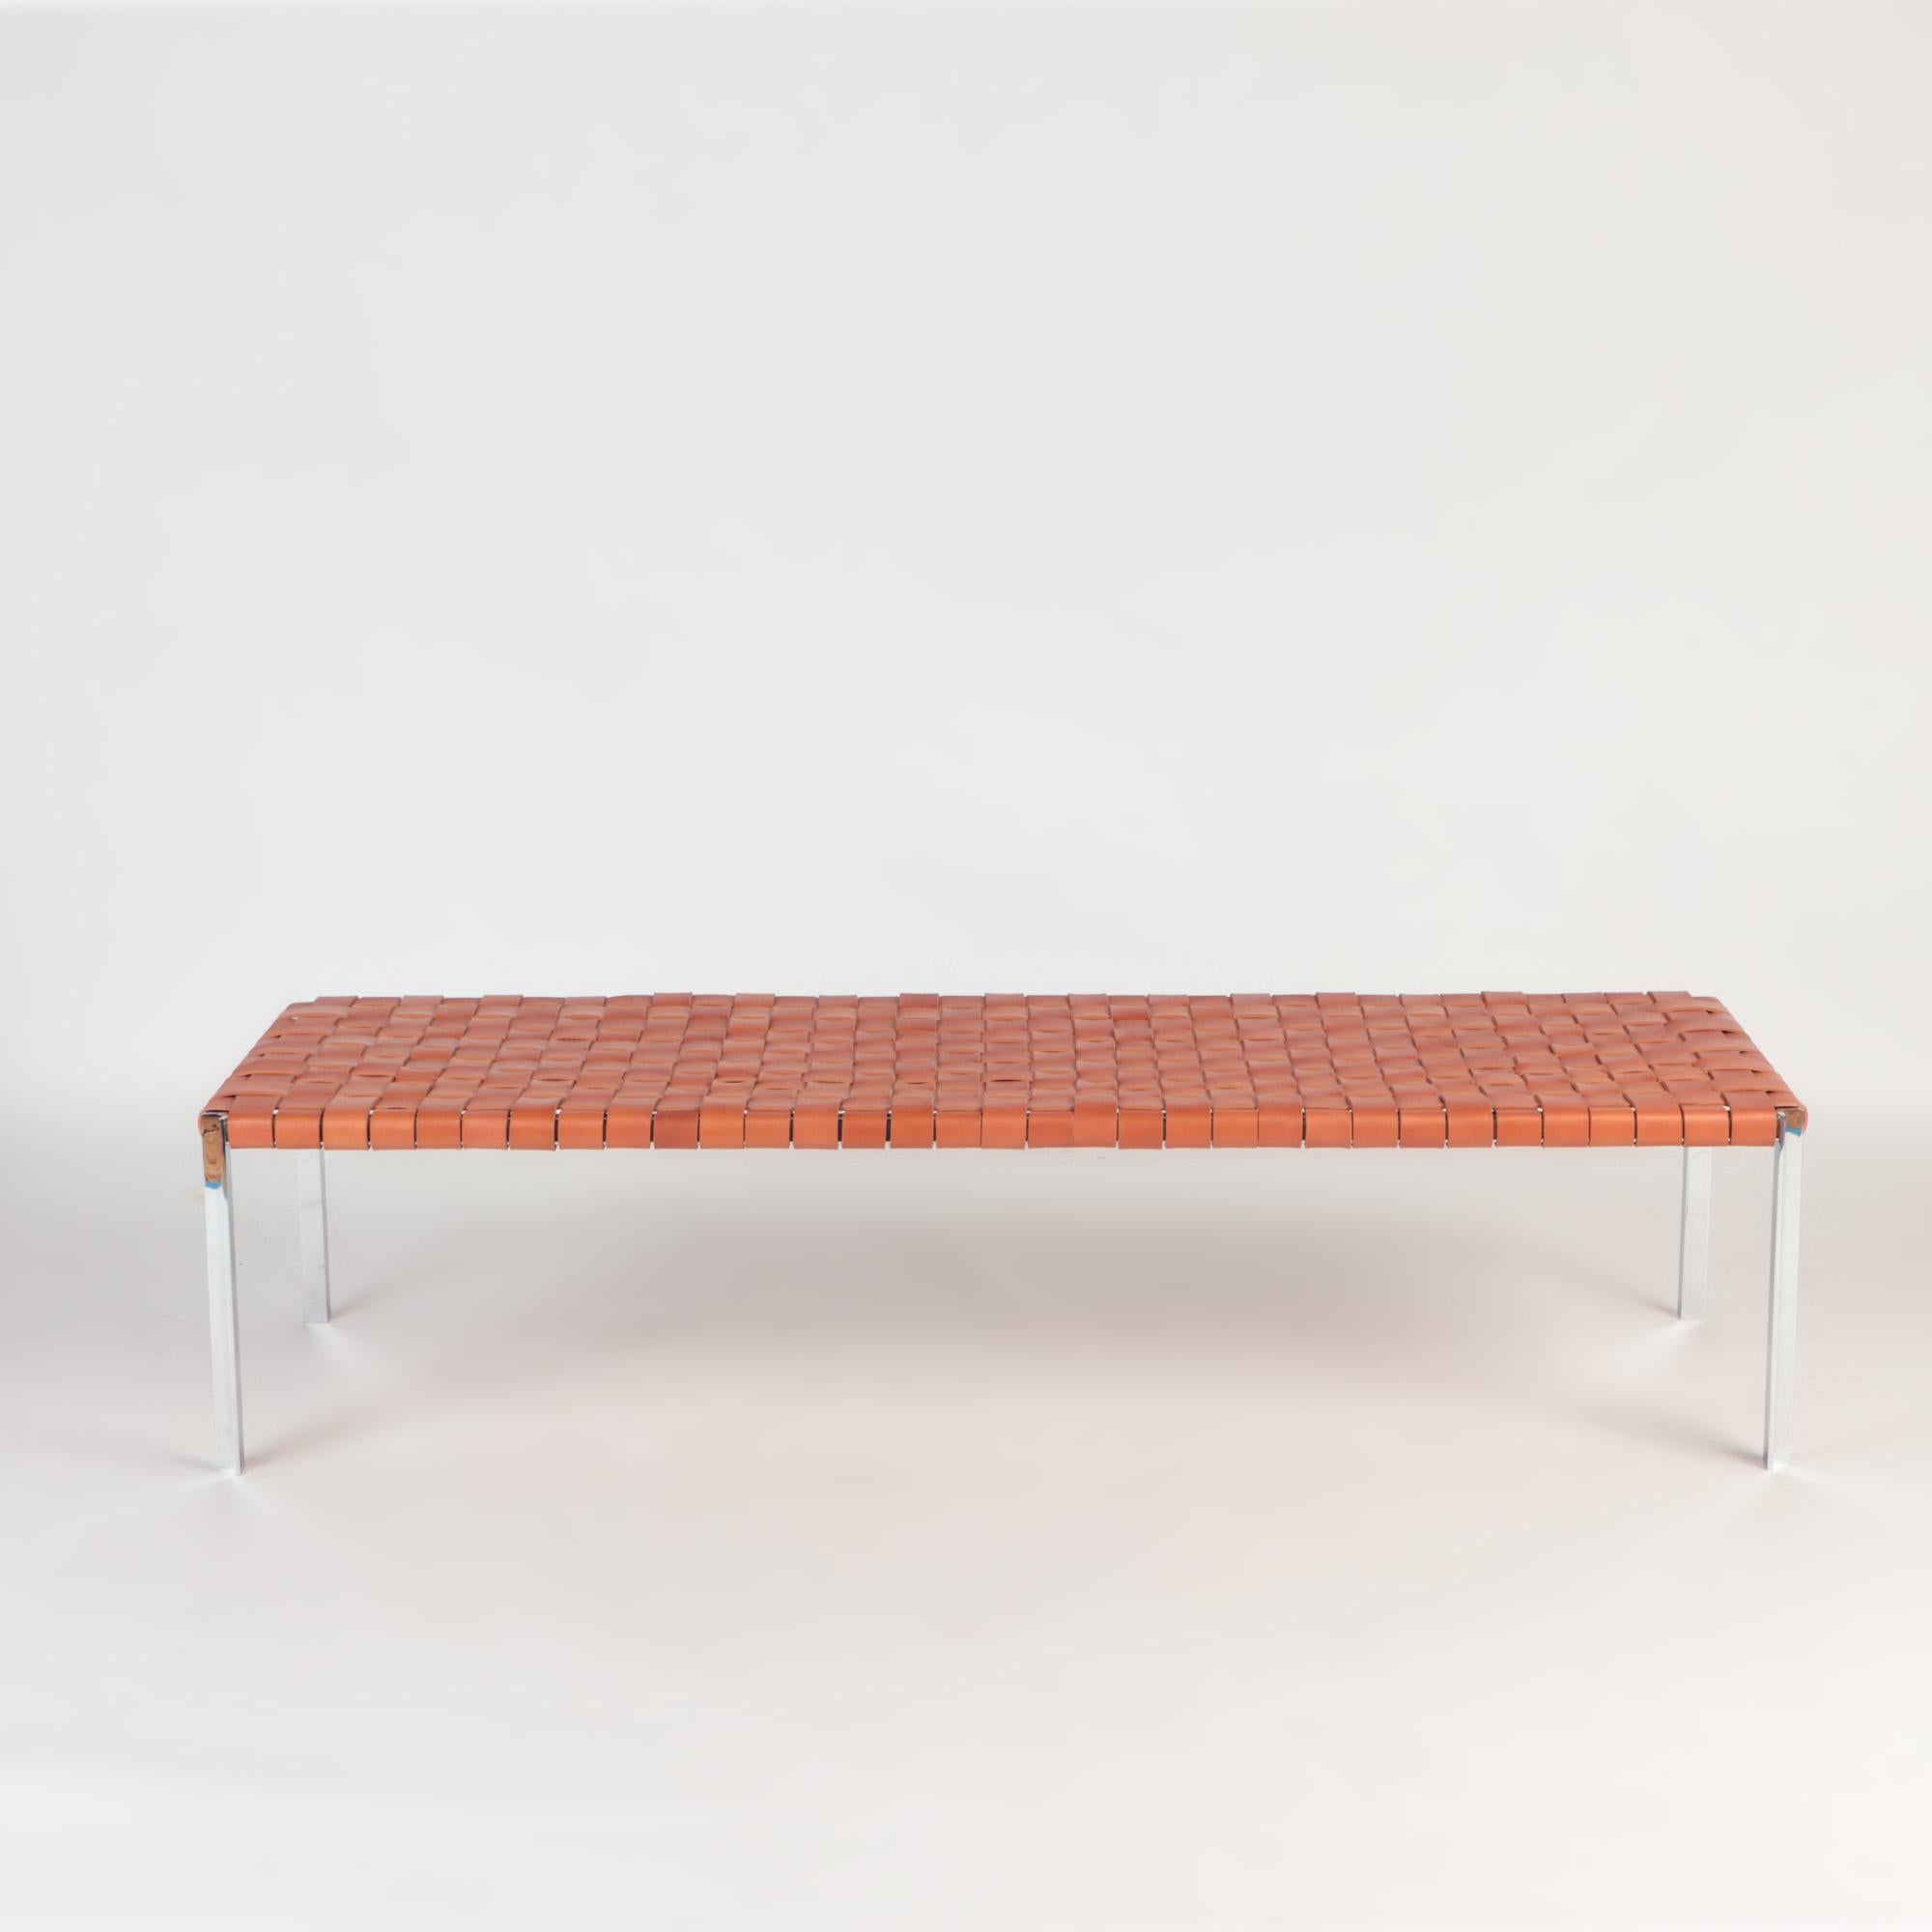 The TG-18 long woven leather bench was designed by Katavolos, Littell and Kelley in 1952 as part of the original Laverne Collection produced by Gratz Industries, formerly known as Trietel-Gratz.
